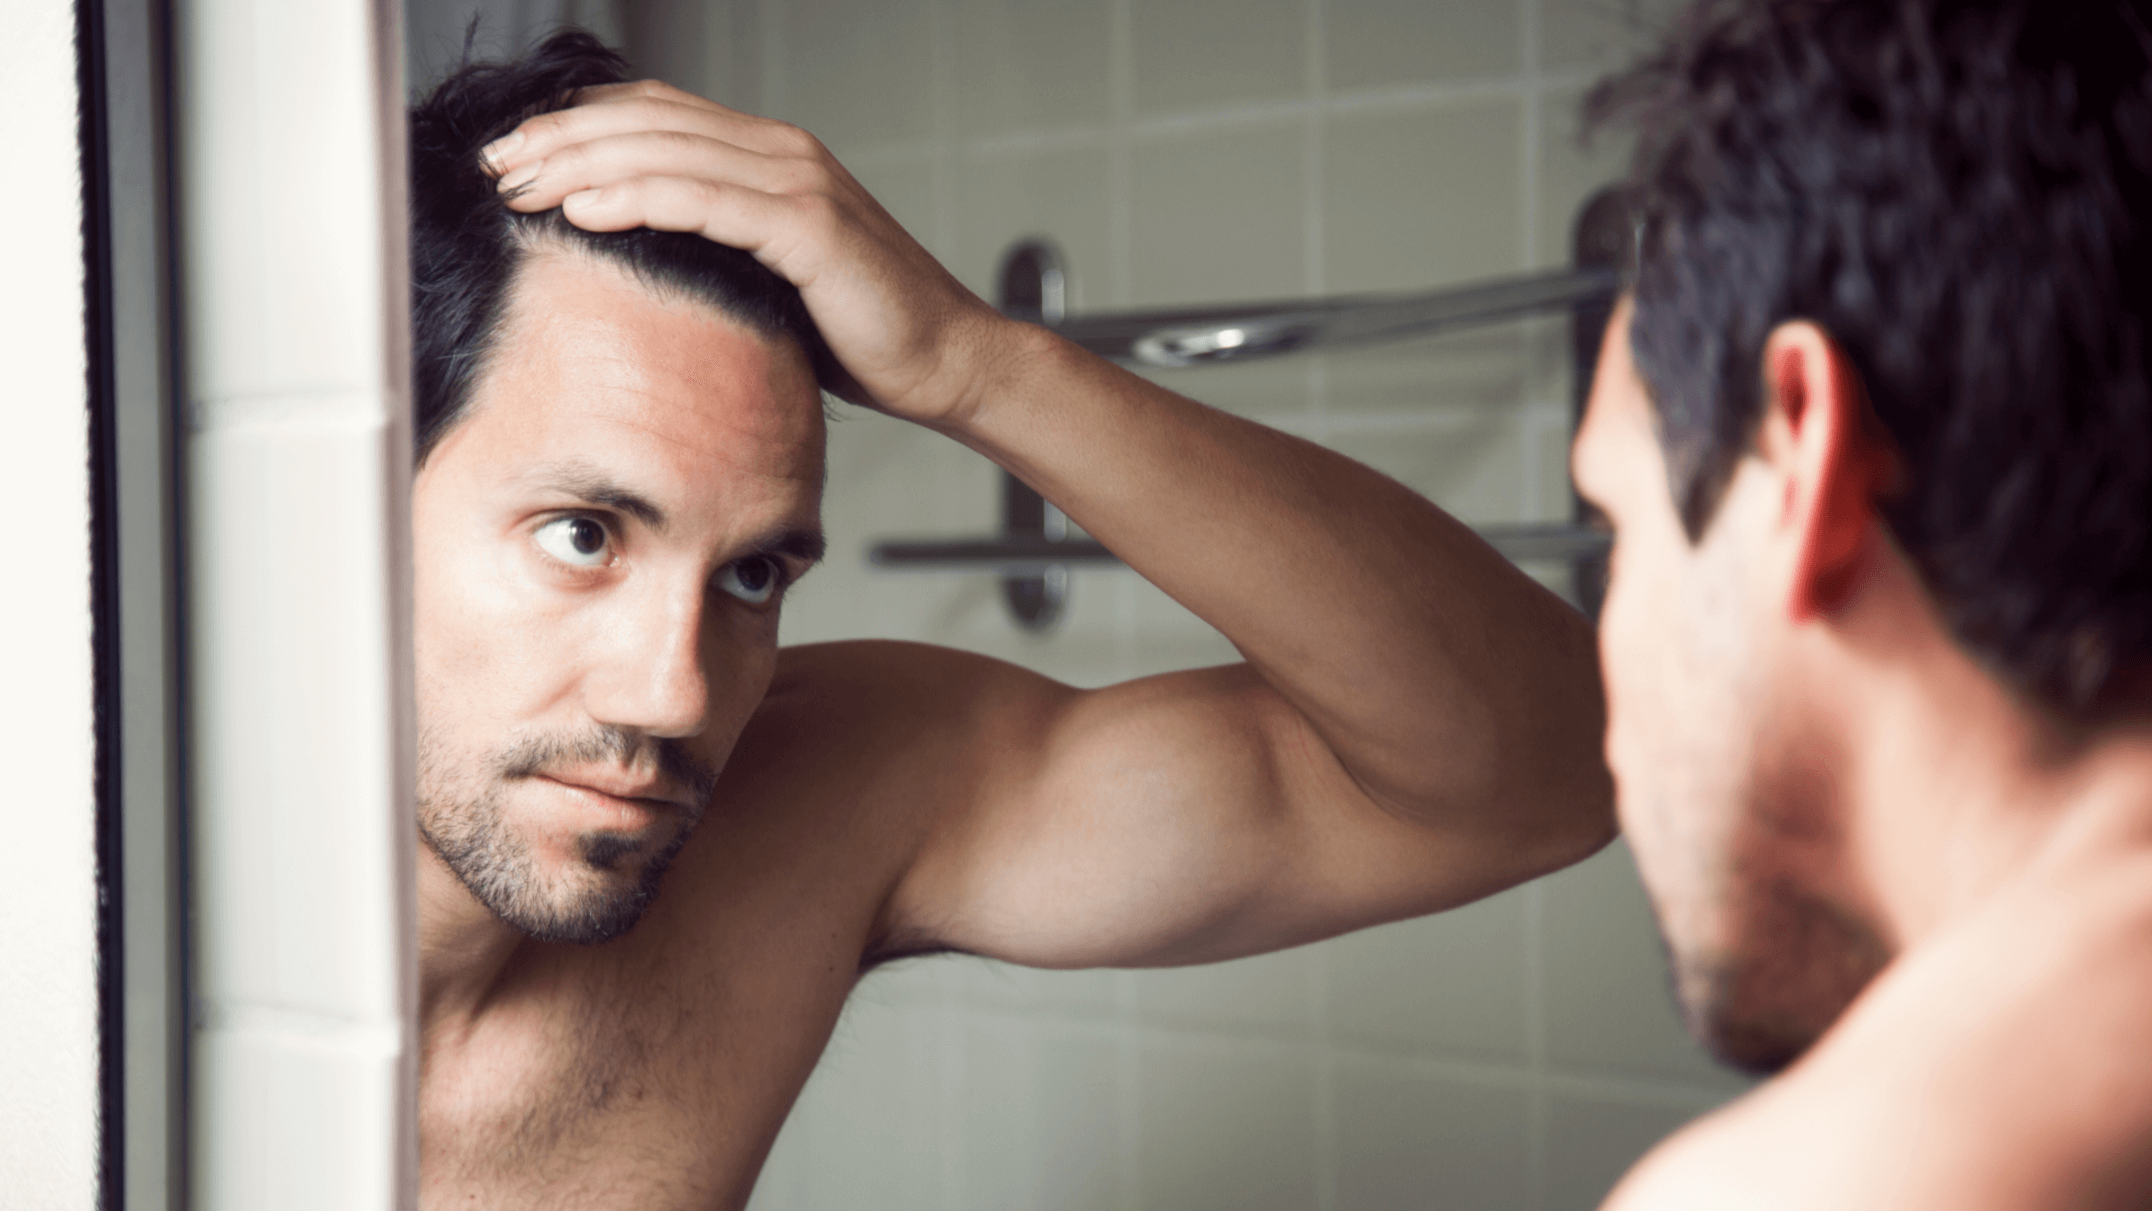 Will FUE Hair Transplant Surgery Damage Your Existing Hair?